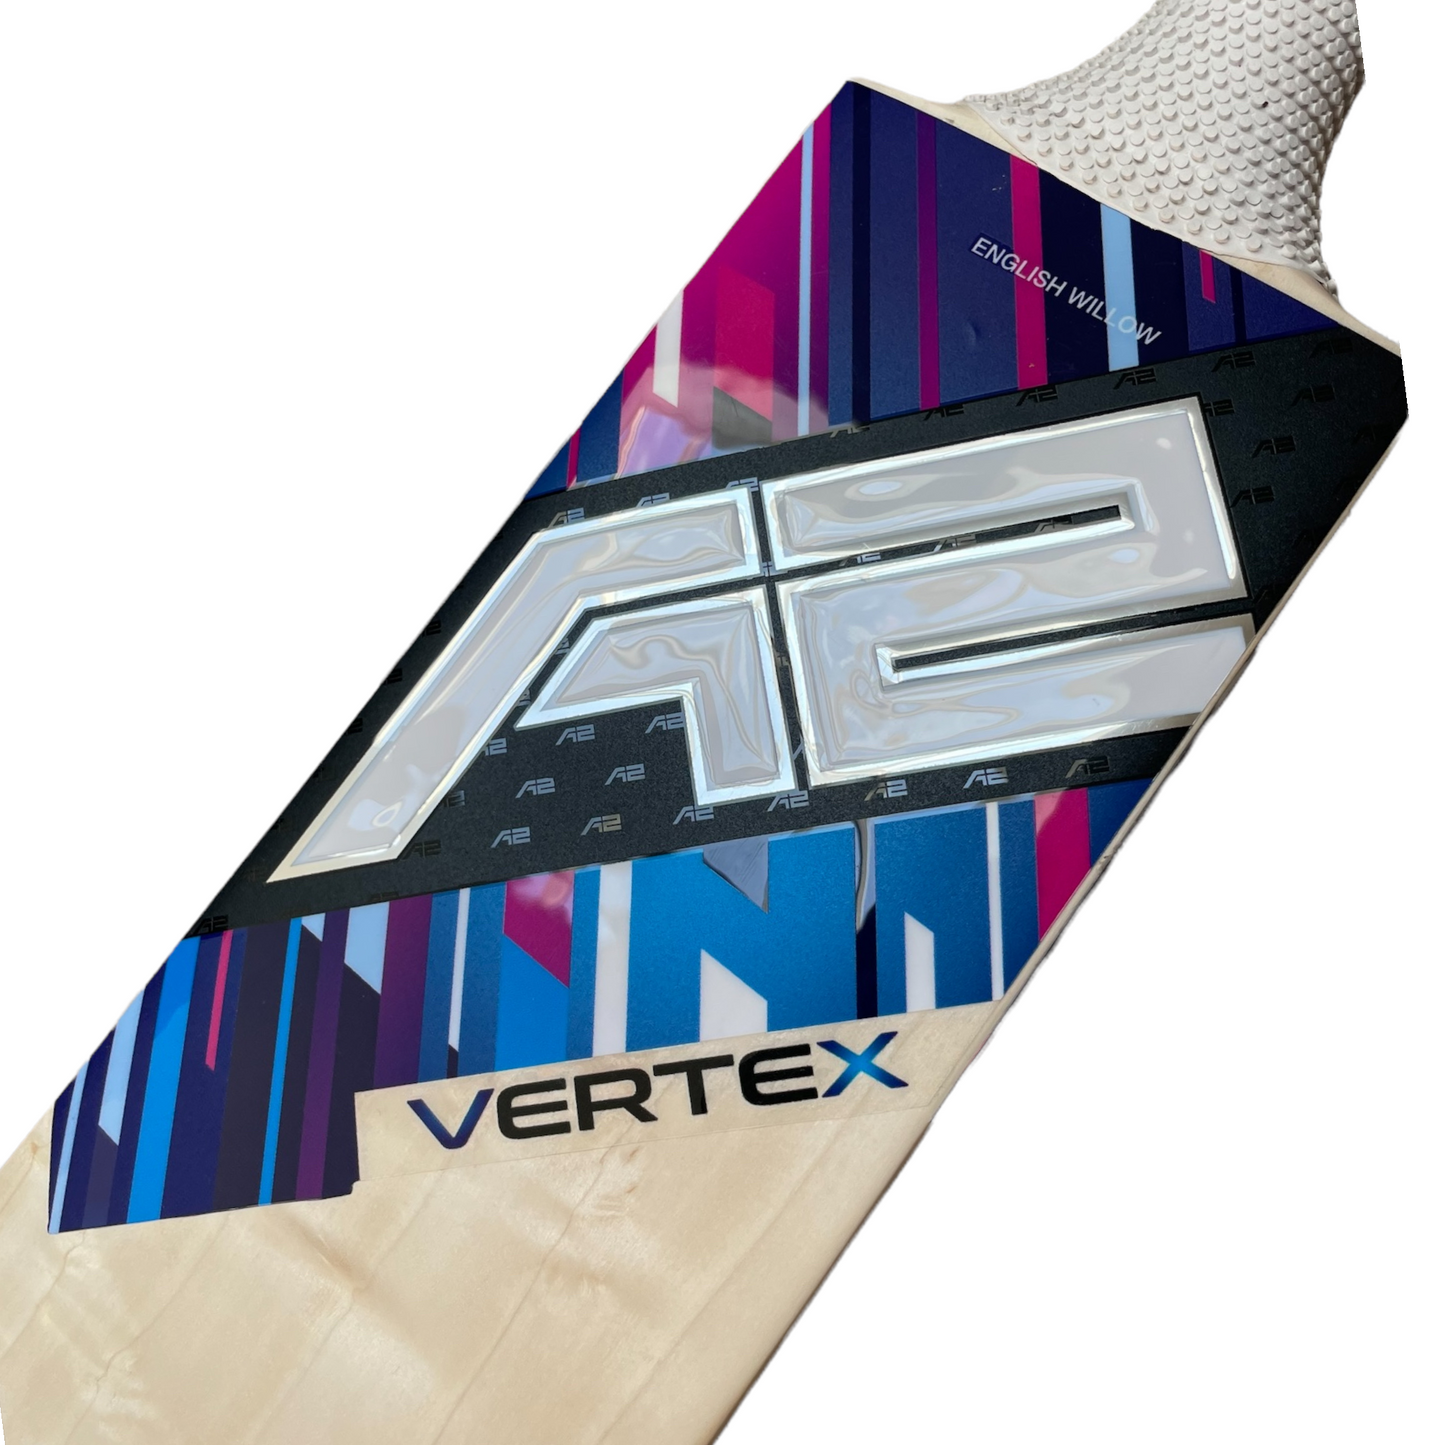 A2 Vertex 2022 English willow cricket bat quality cricket bat low price UK Custom cricket 201 online shop store cricket bat supplier Brighton and Hove East Sussex